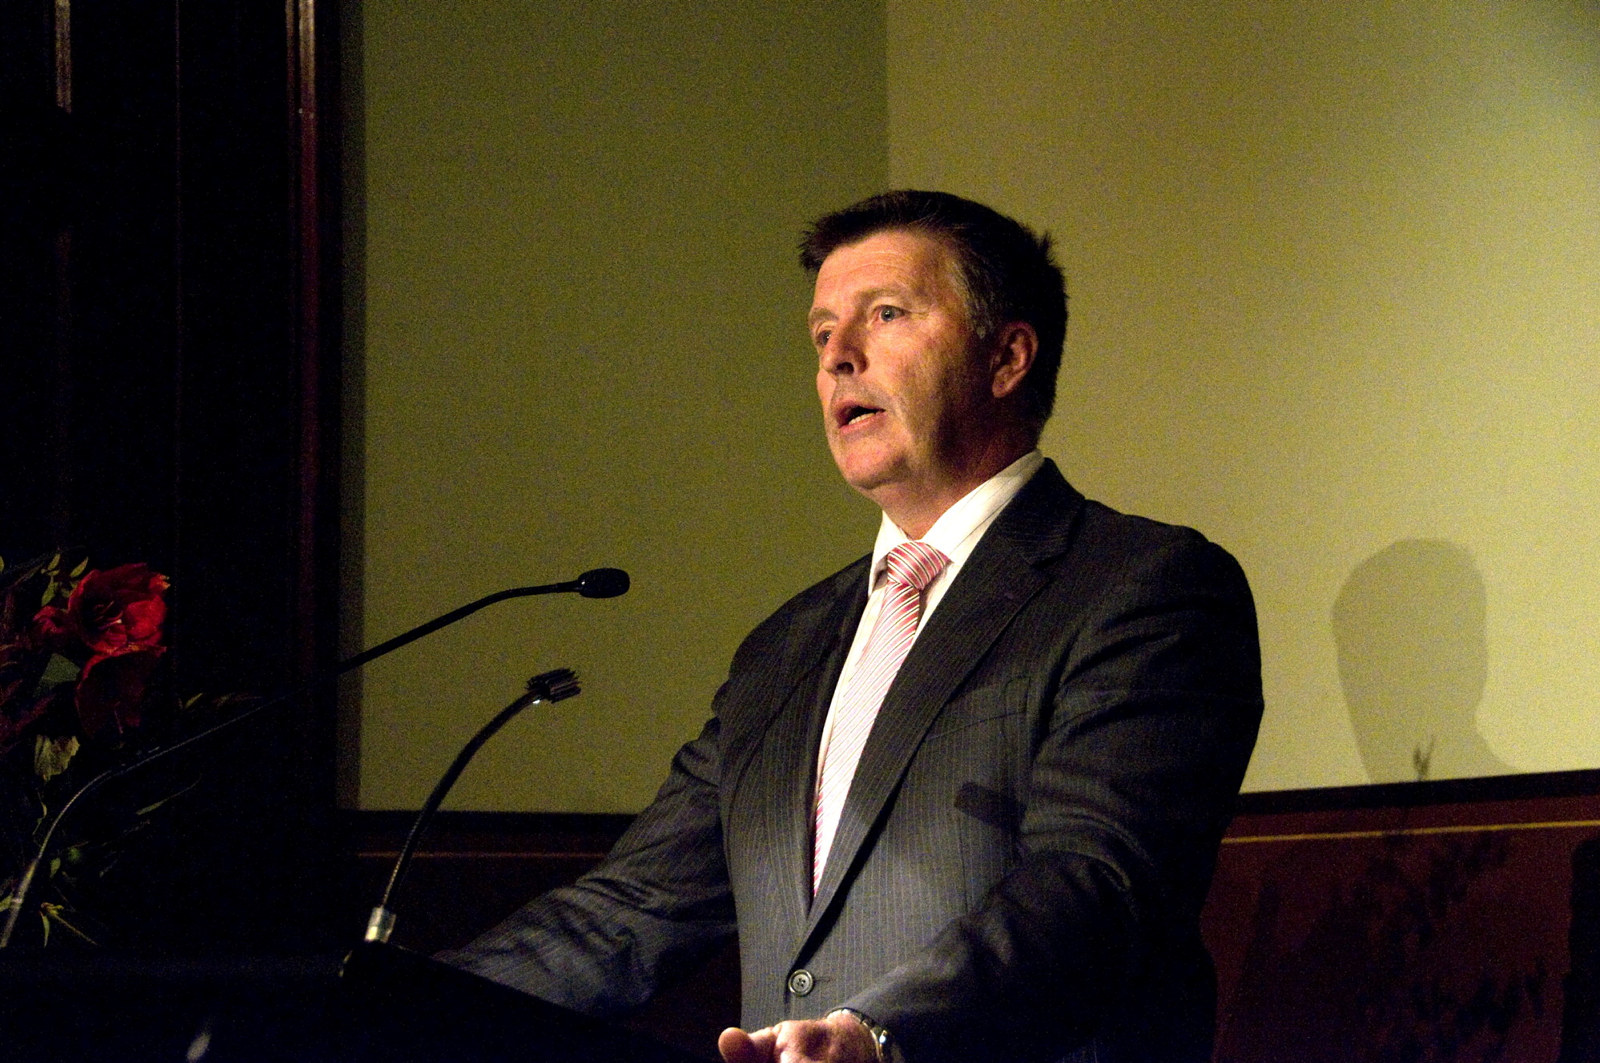 Minister for NSW Police The Hon Michael Gallacher at the Justice and Police Museum